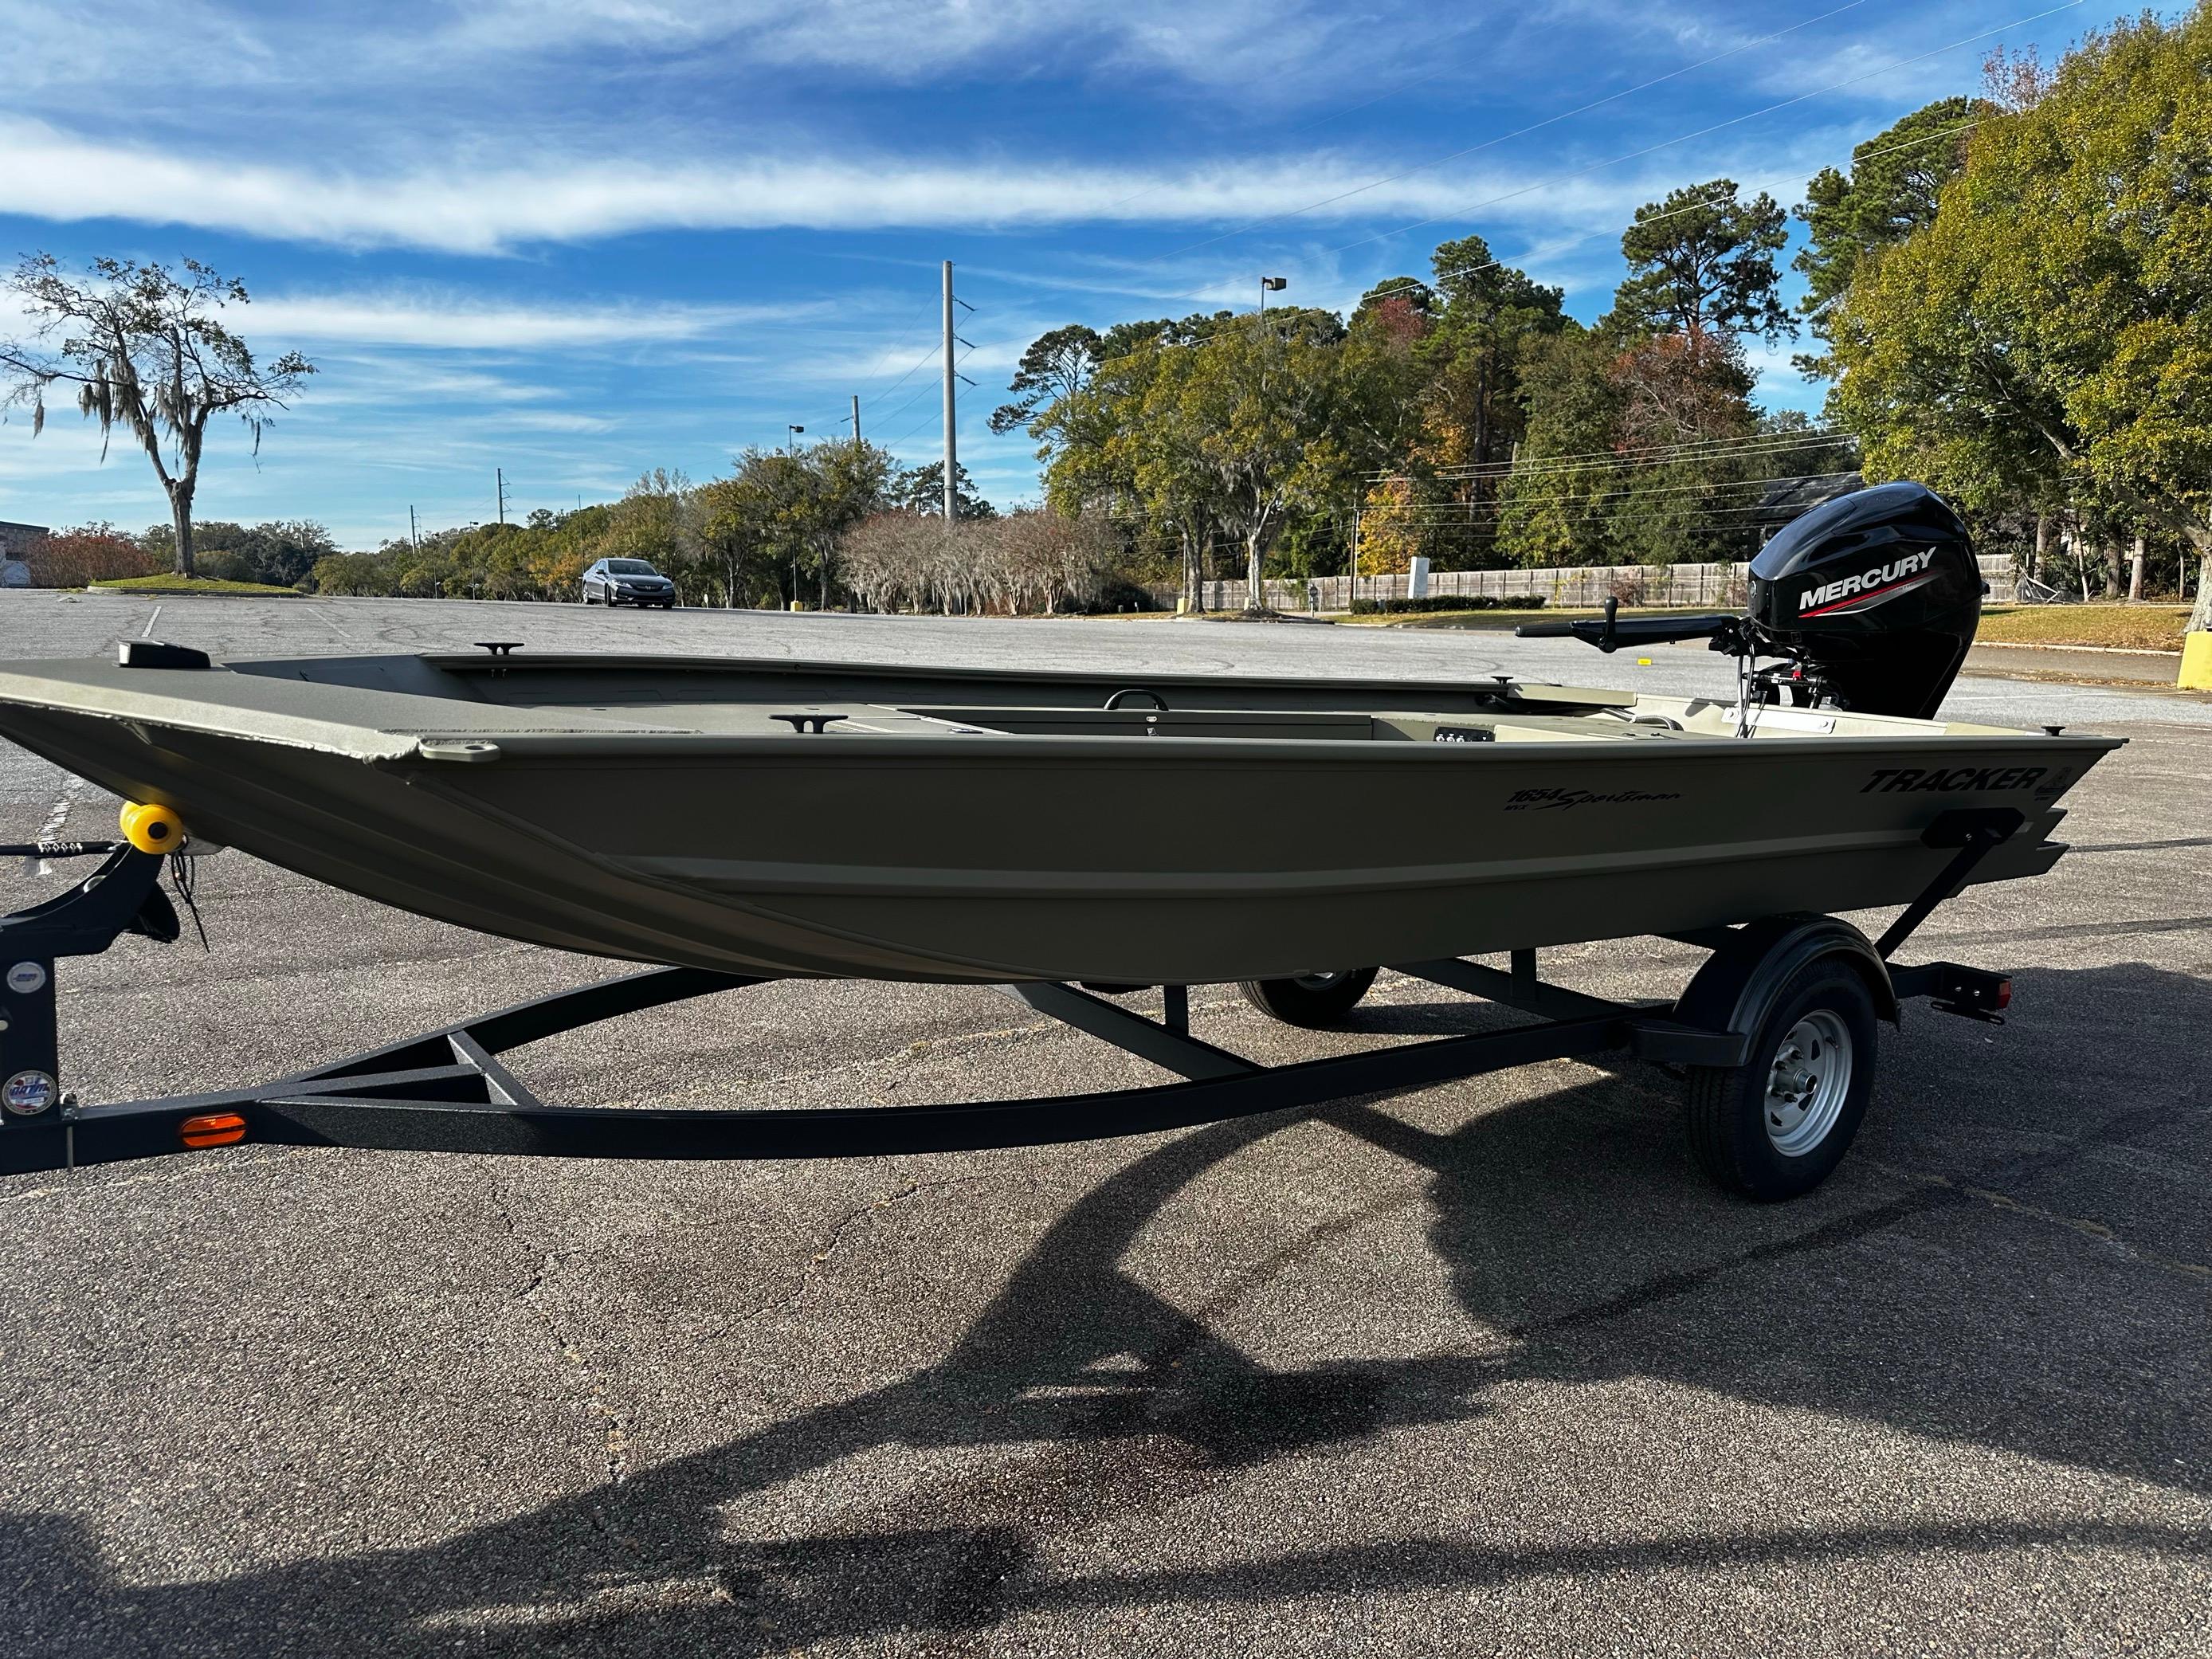 New 2023 Tracker Grizzly 1654 T Sportsman, 31419 Savannah - Boat